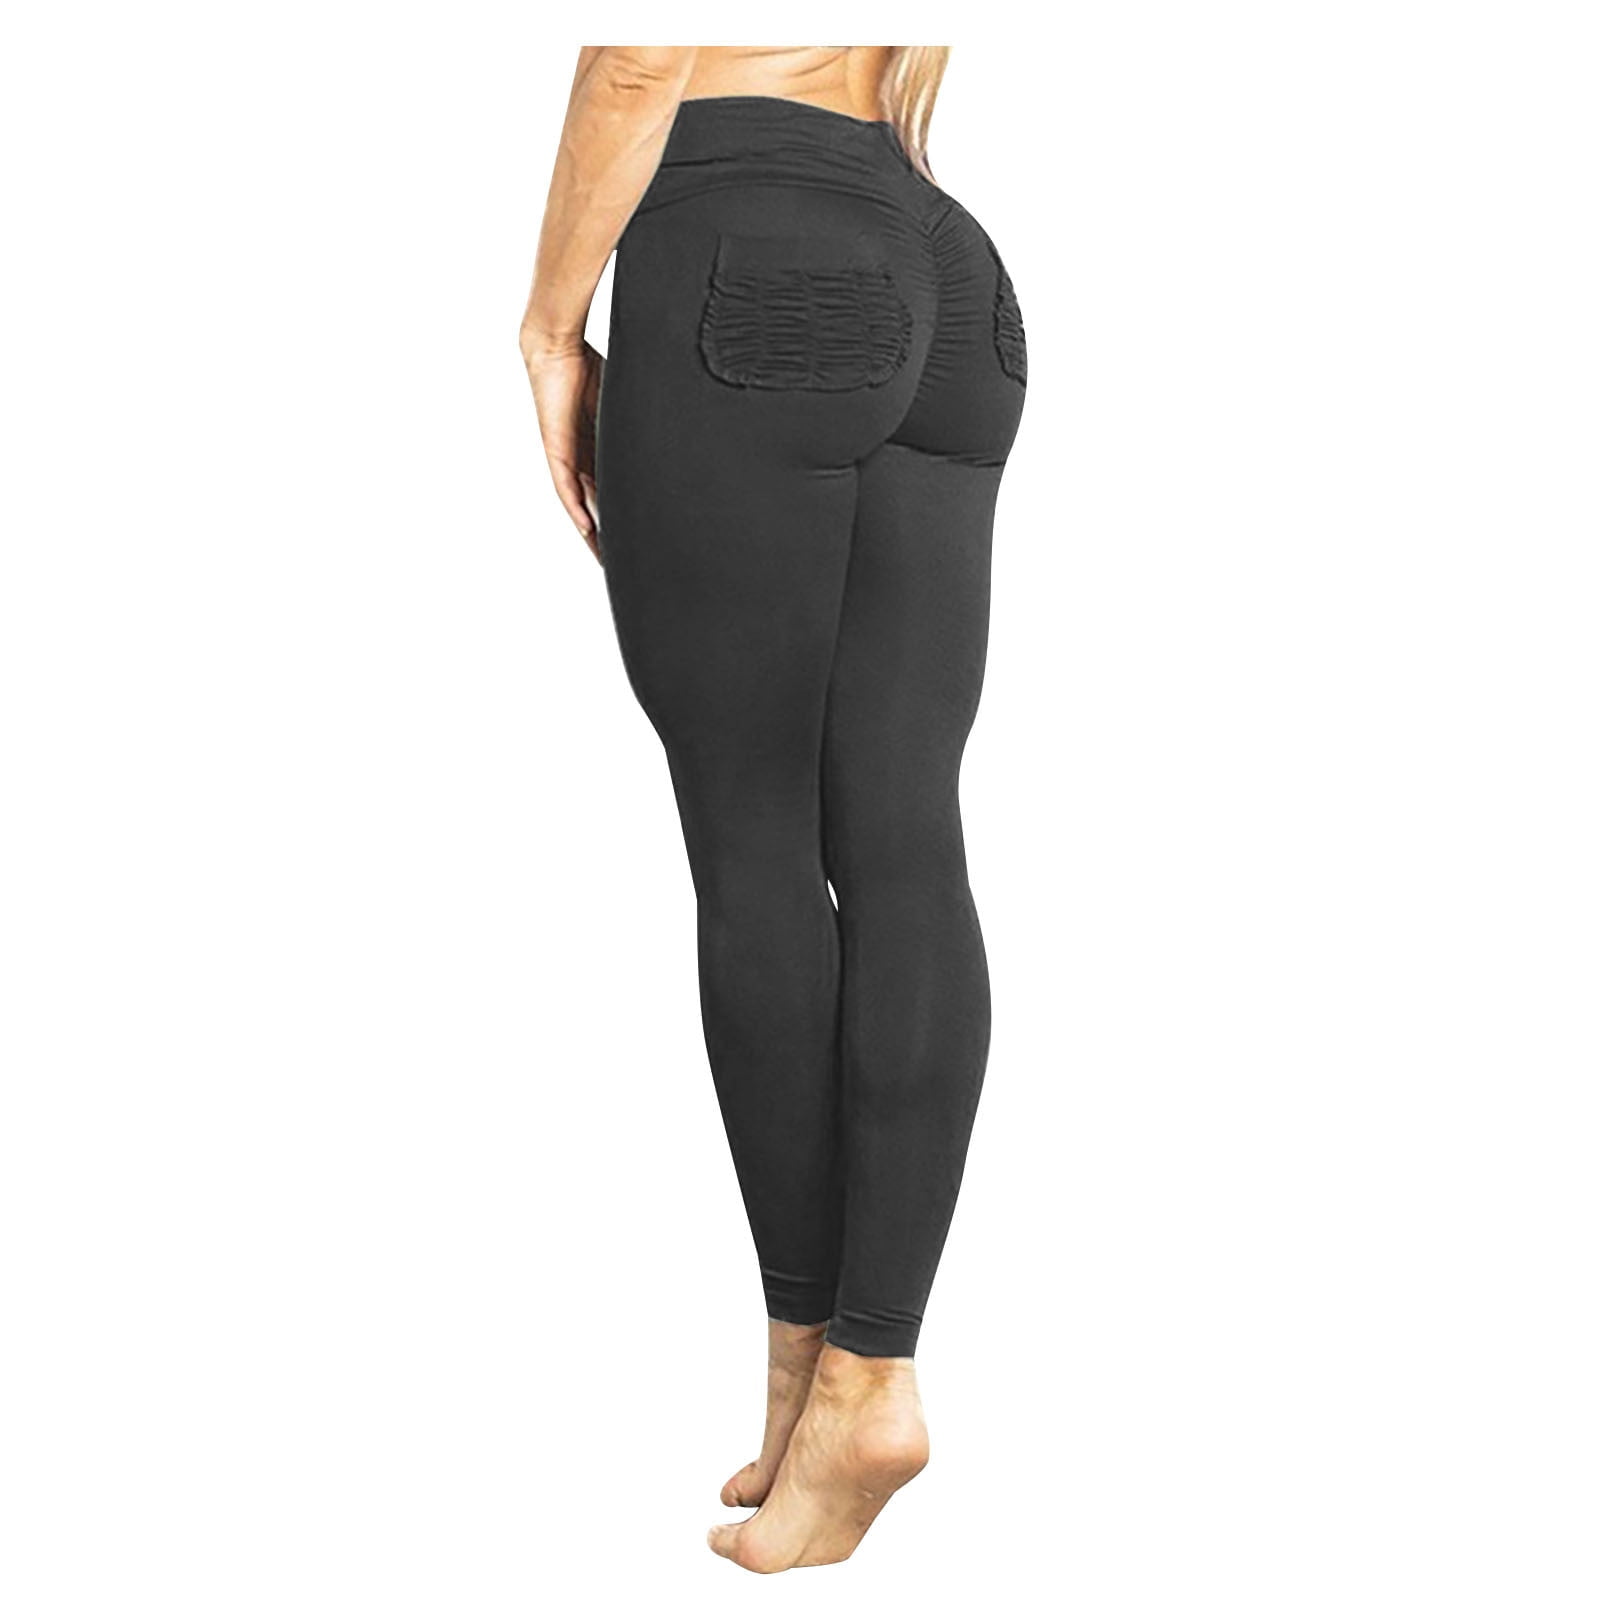 YWDJ Tights for Women with Pockets Butt Lifting High Waist